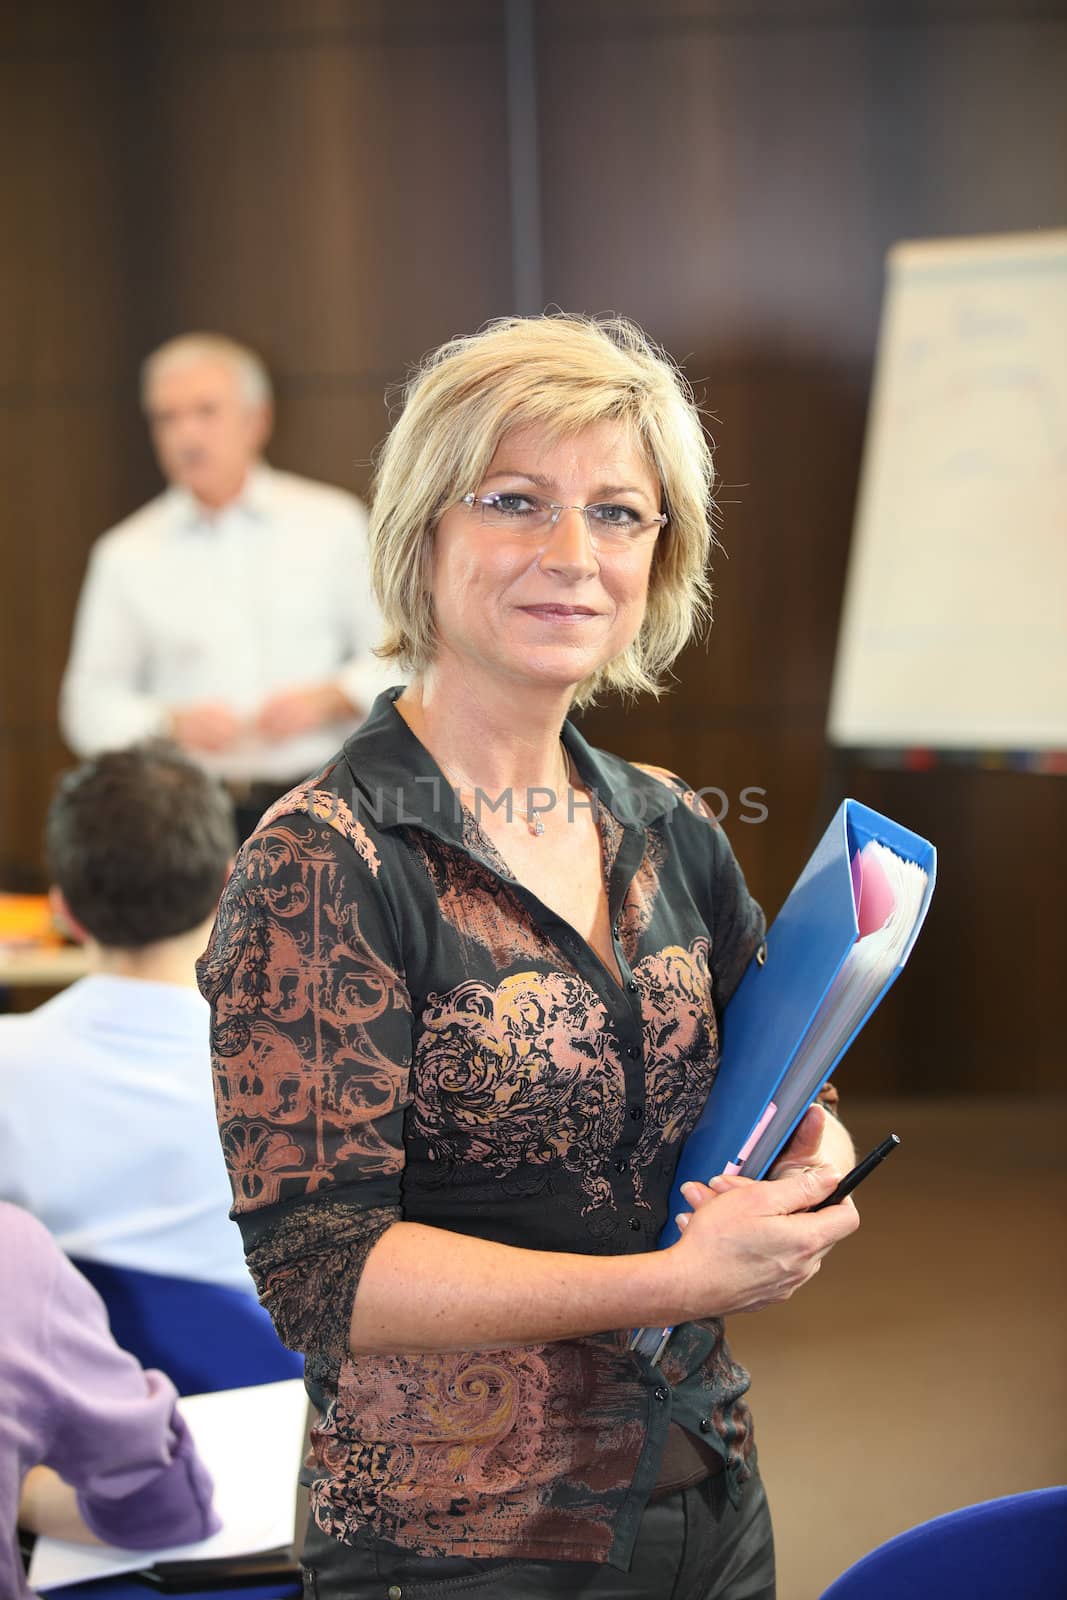 Woman holding a file during a presentation